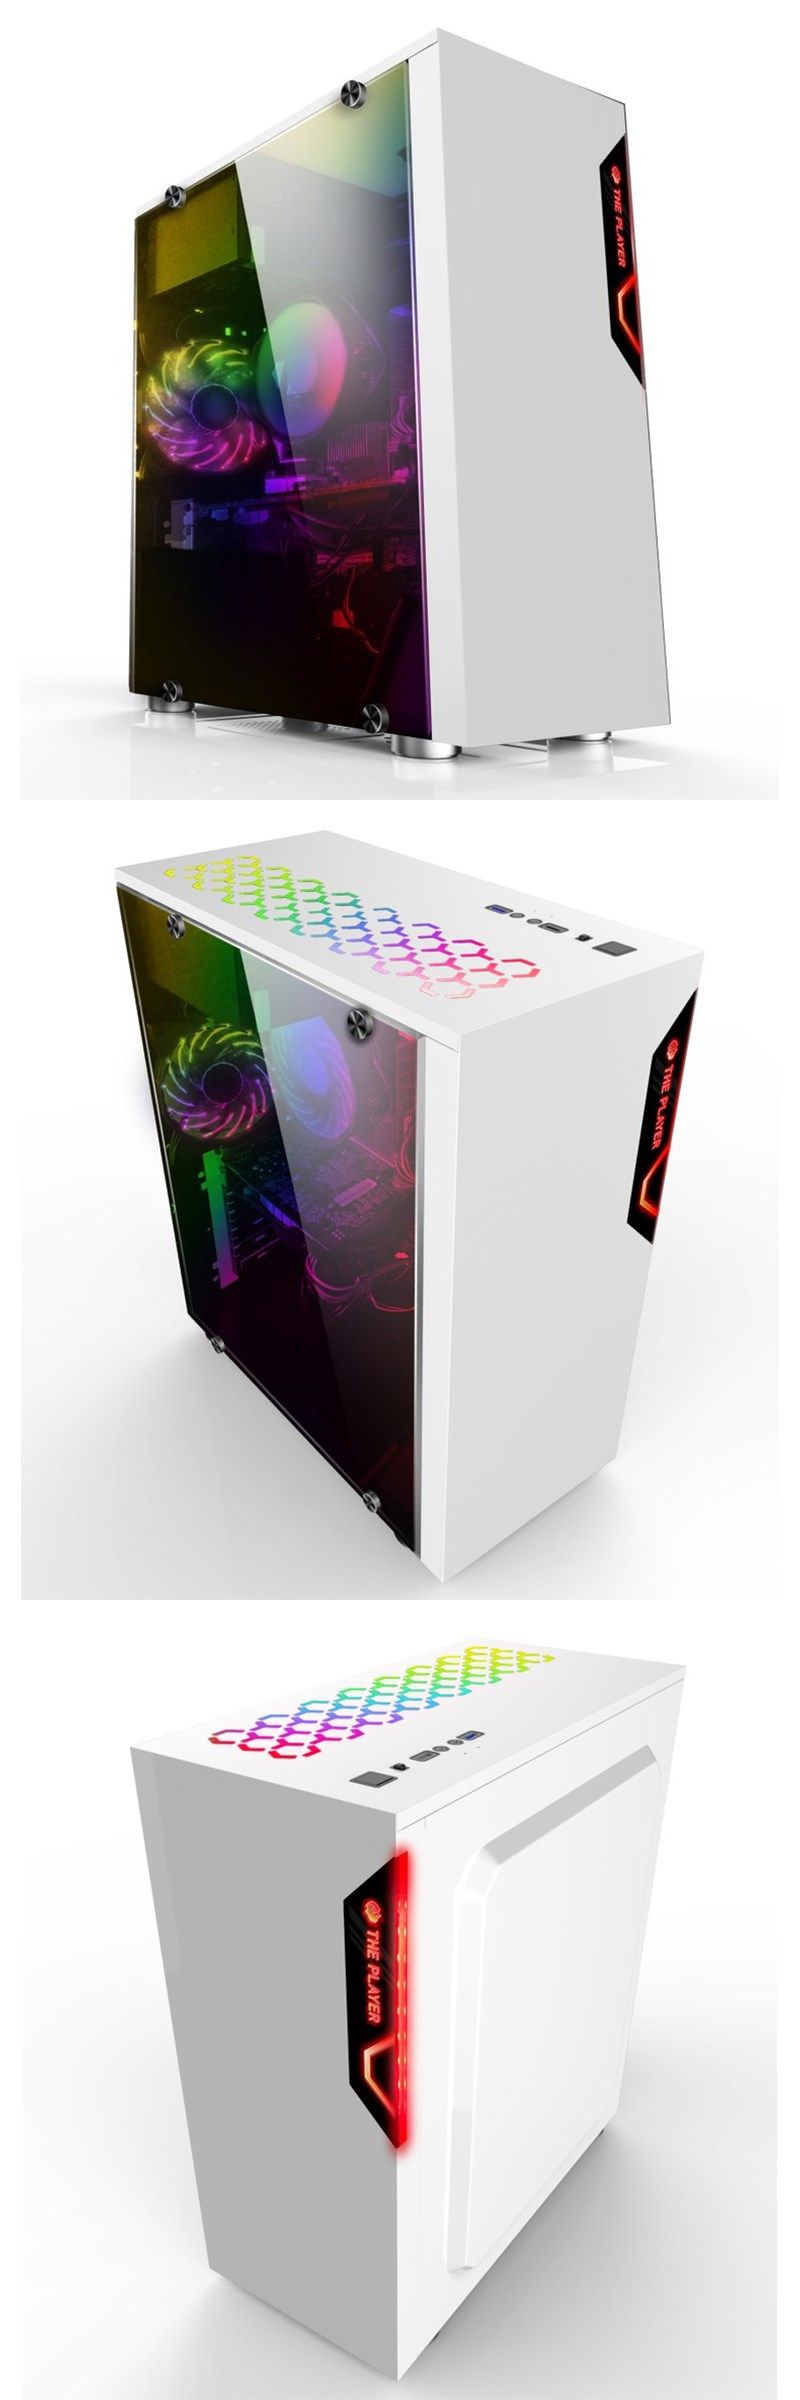 Thicken-Transparent-Computer-Case-ATX-Micro-ATX-Mini-ITX-PC-Case-Desktop-Chassis-USB-20-with-Cooling-1605161